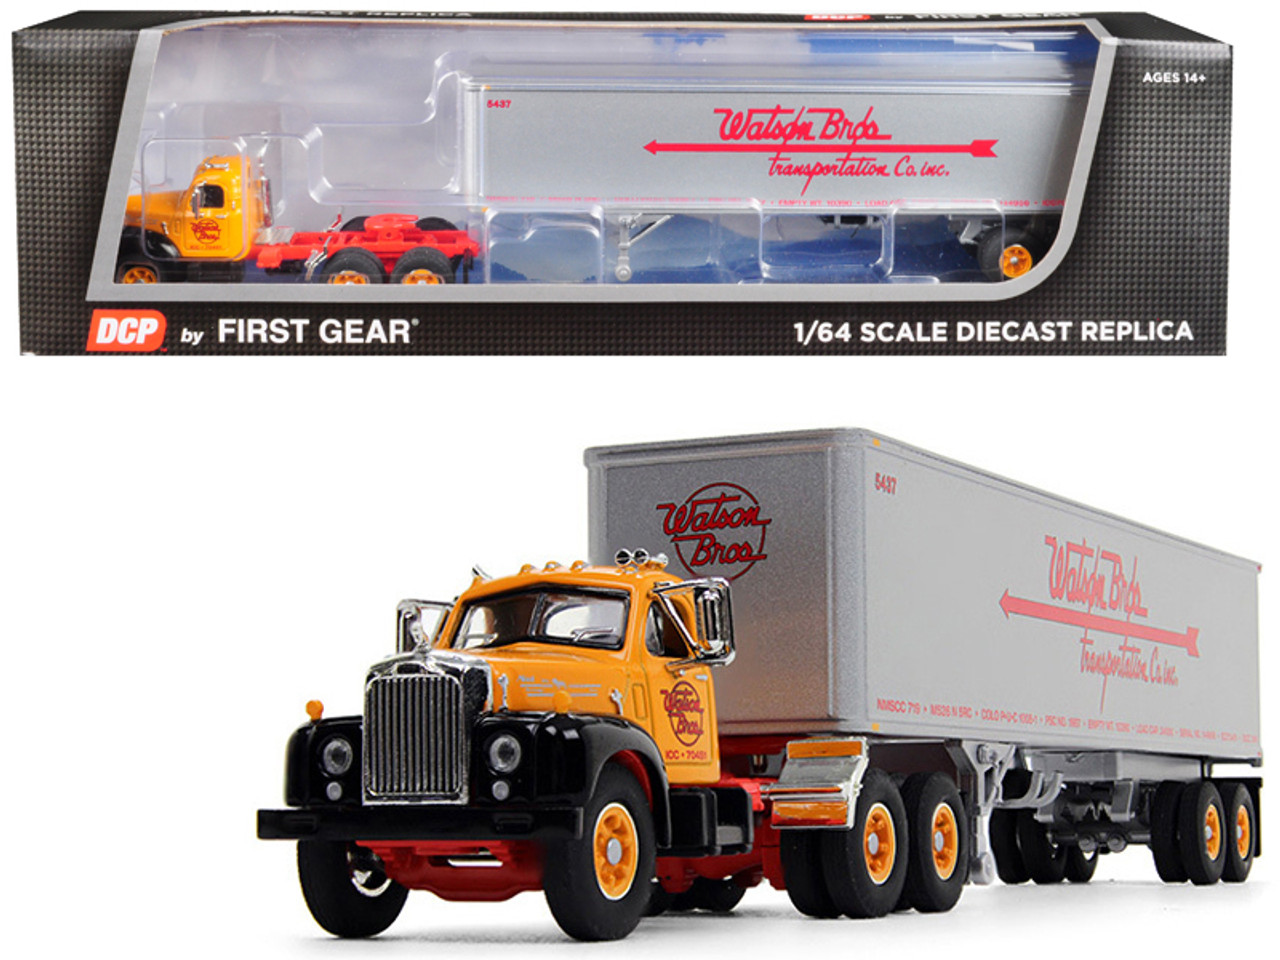 Mack B-61 Day Cab with 40' Vintage Trailer "Watson Bros. Transportation" 29th in a "Fallen Flag Series" 1/64 Diecast Model by DCP/First Gear